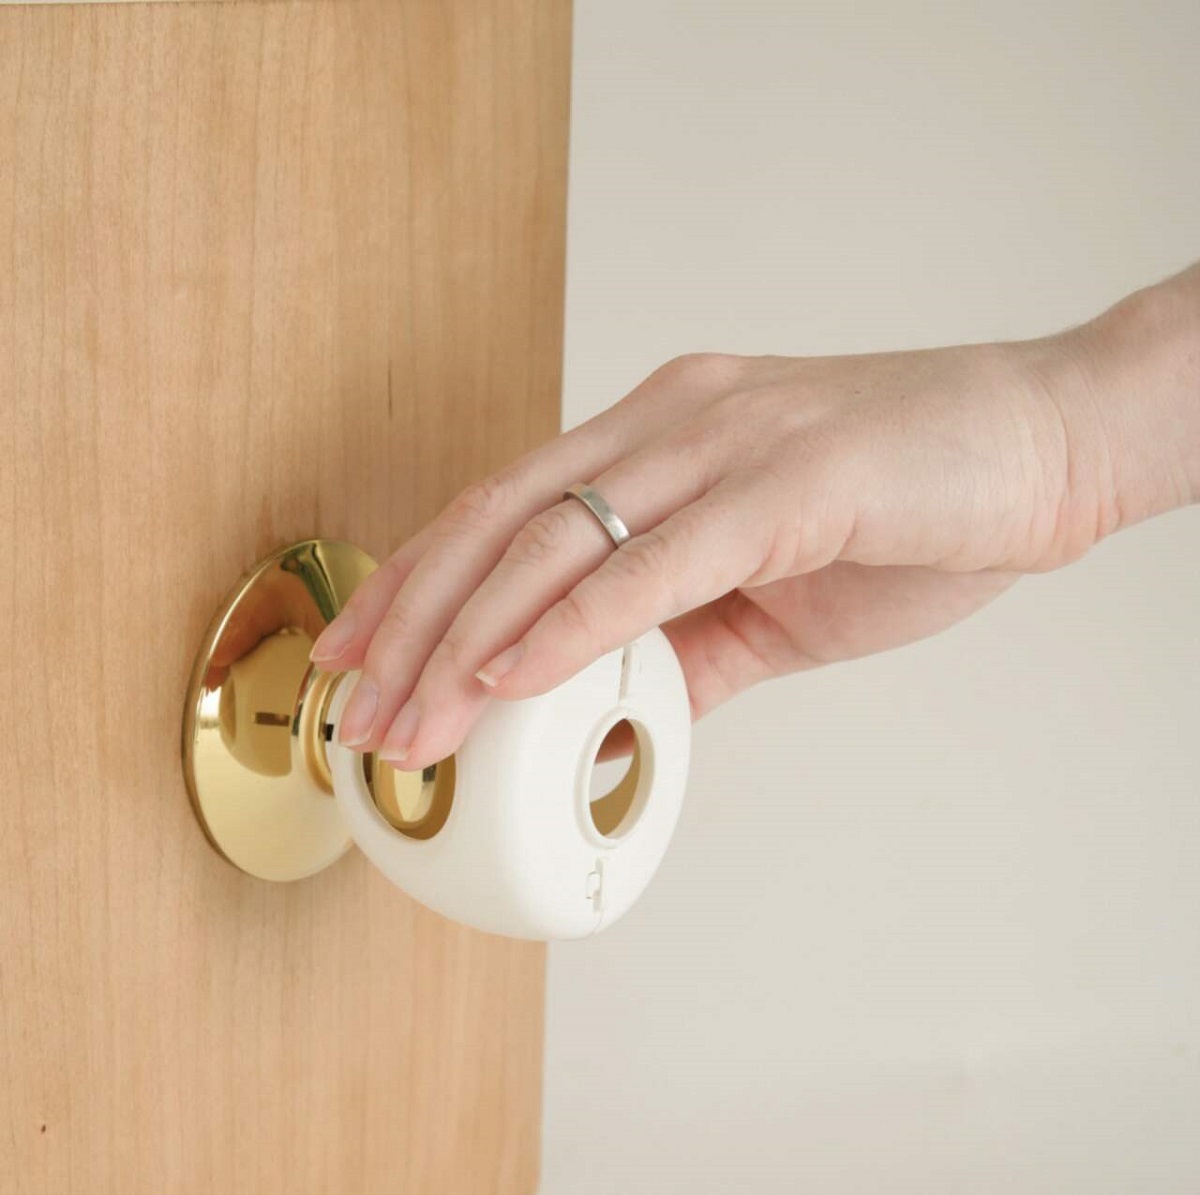 How To Remove Safety First Door Lock